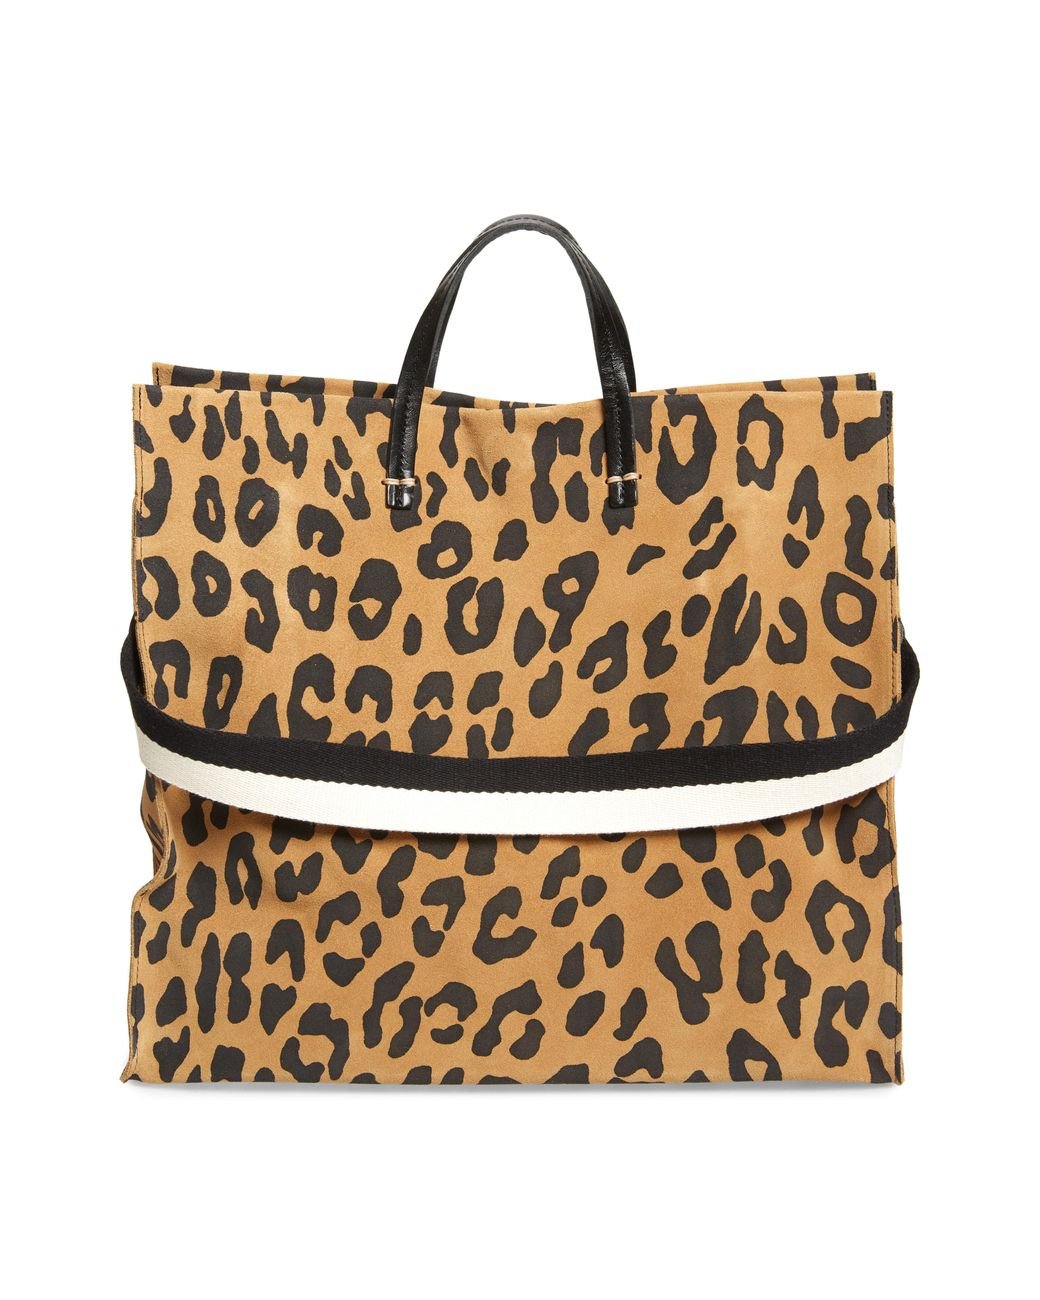 Petit Simple Tote in Leopard Hair by Clare V.